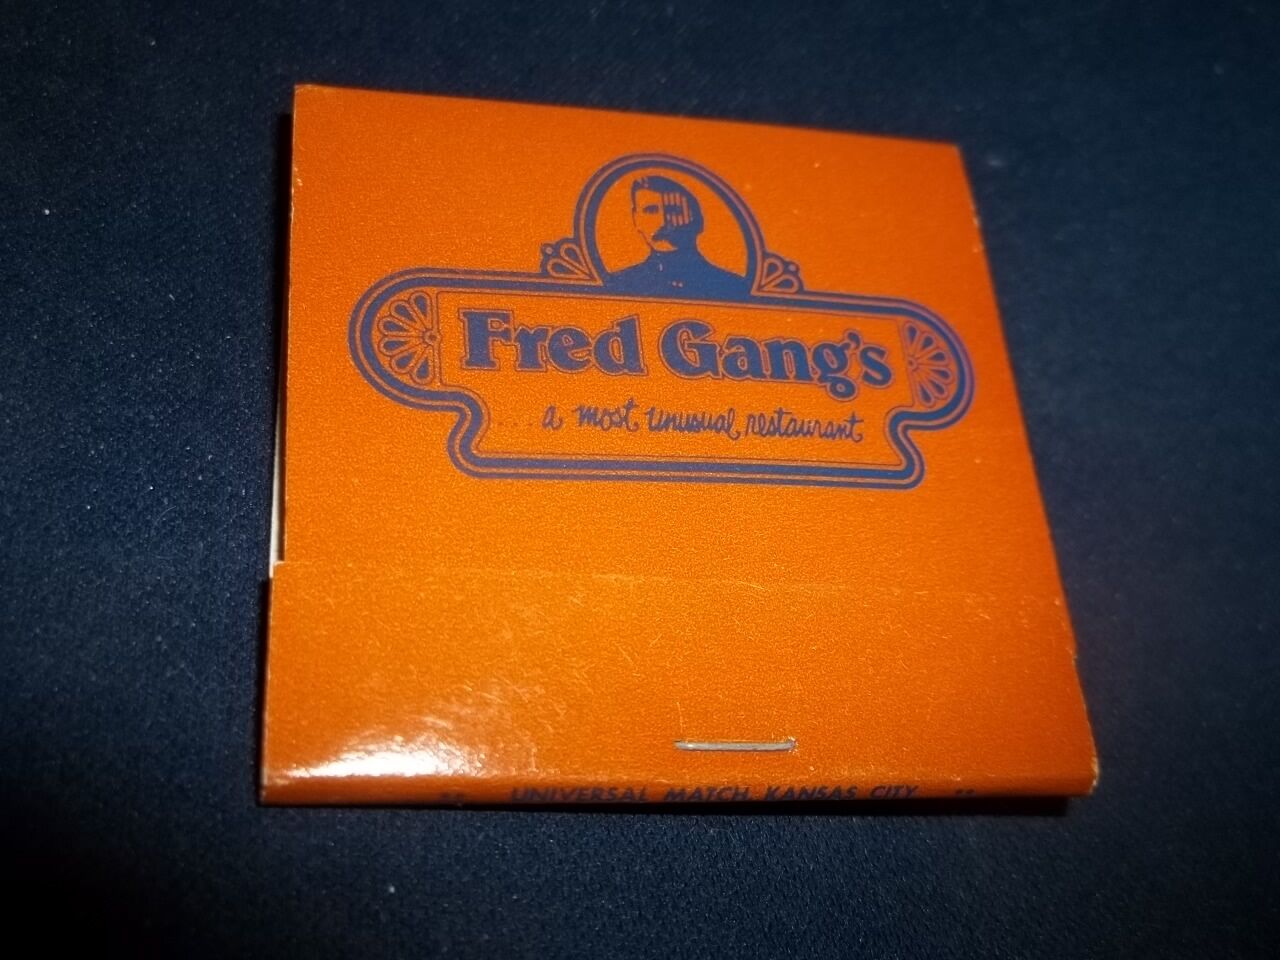 New Old Stock Fred Gang\'s A Most Unusual Restaurant Matchbook